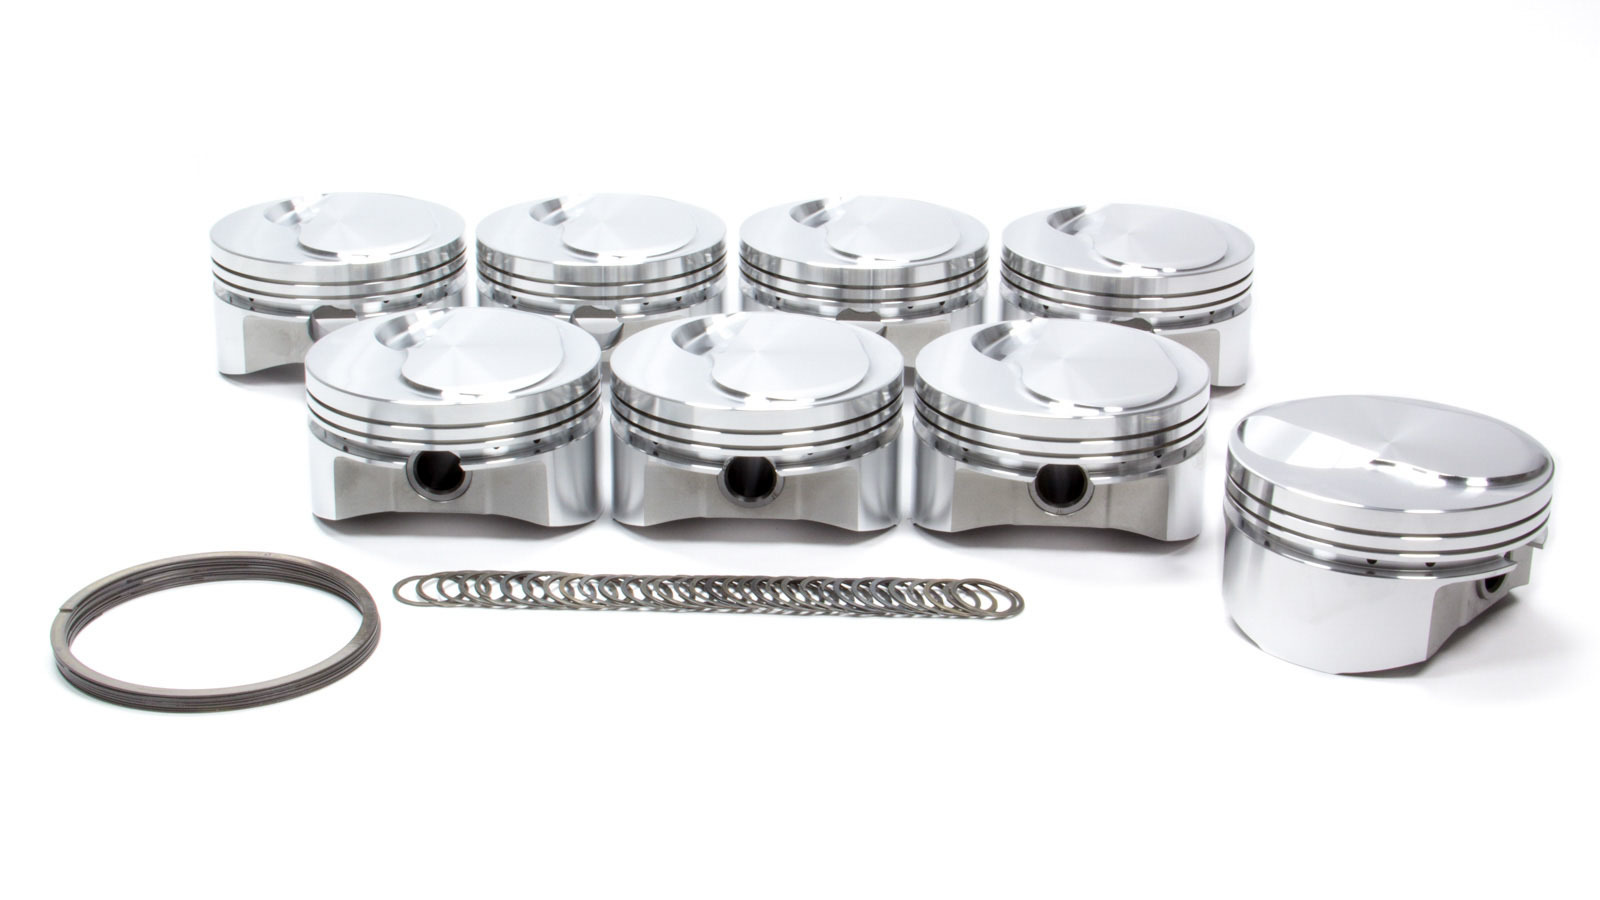 SRP Pistons 212162 Piston, BBC Small Dome Profile, Forged, 4.530 in Bore, 1/16 x 1/16 x 3/16 in Ring Grooves, Plus 10.00 cc, Big Block Chevy, Set of 8